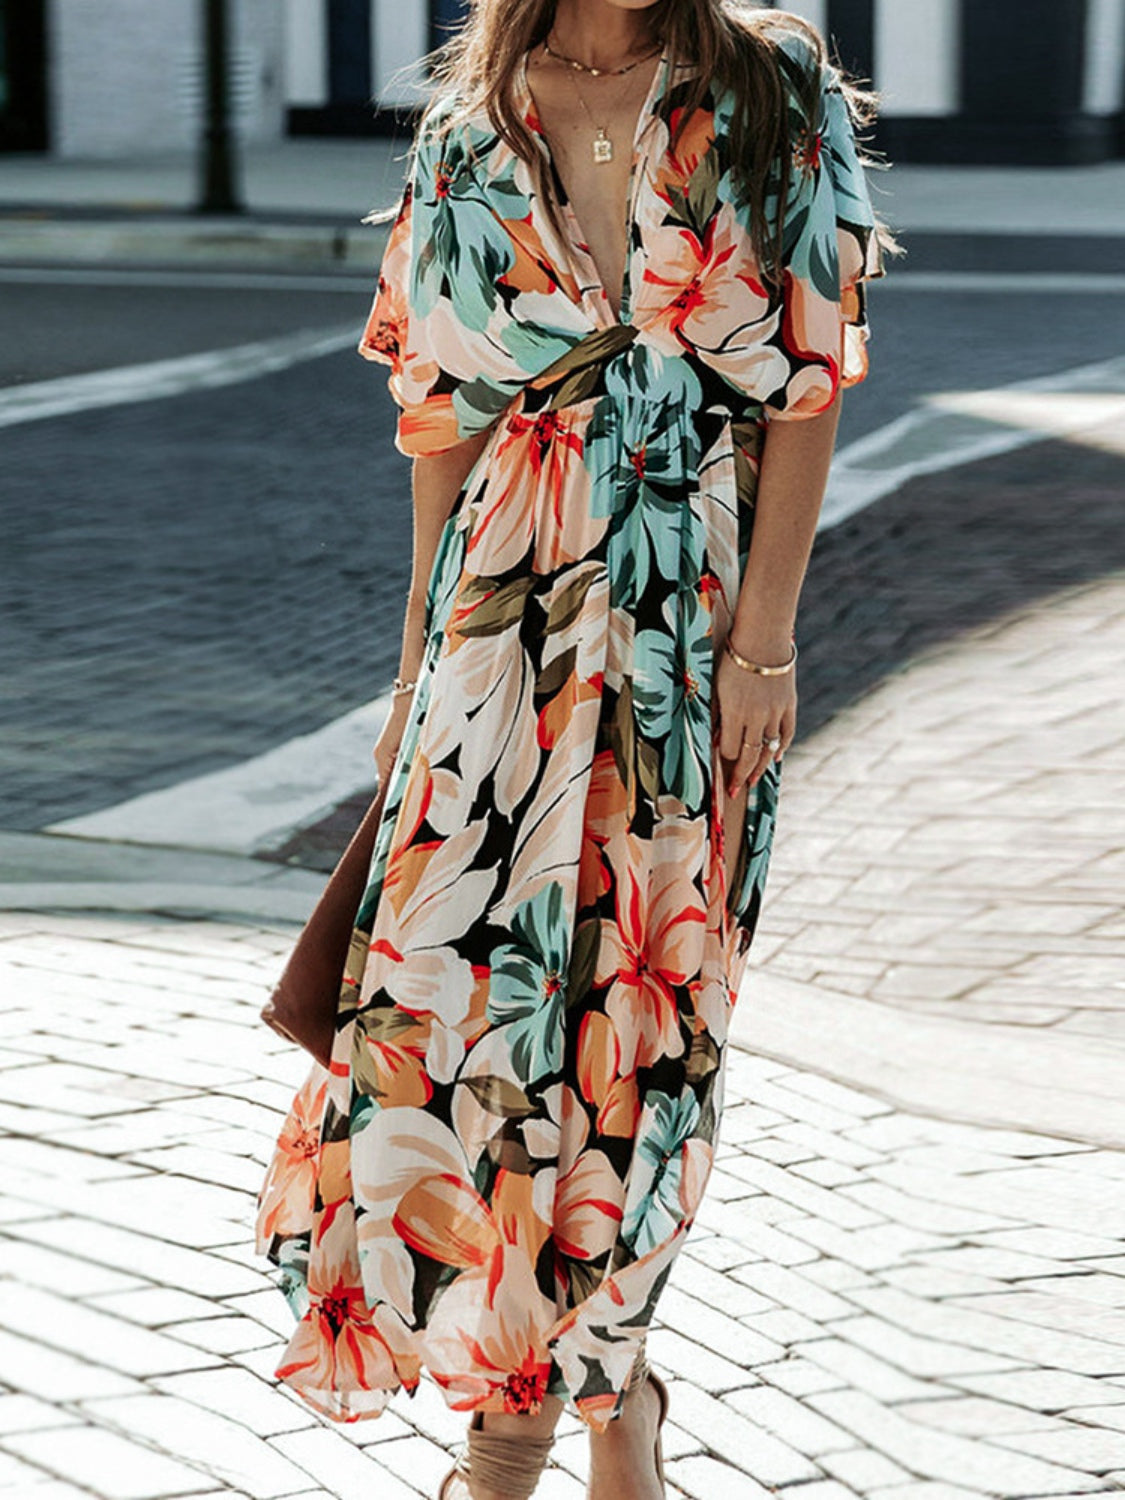 Beach Wedding Guest Attire: Floral Plunge Dress with Half Sleeves for Women